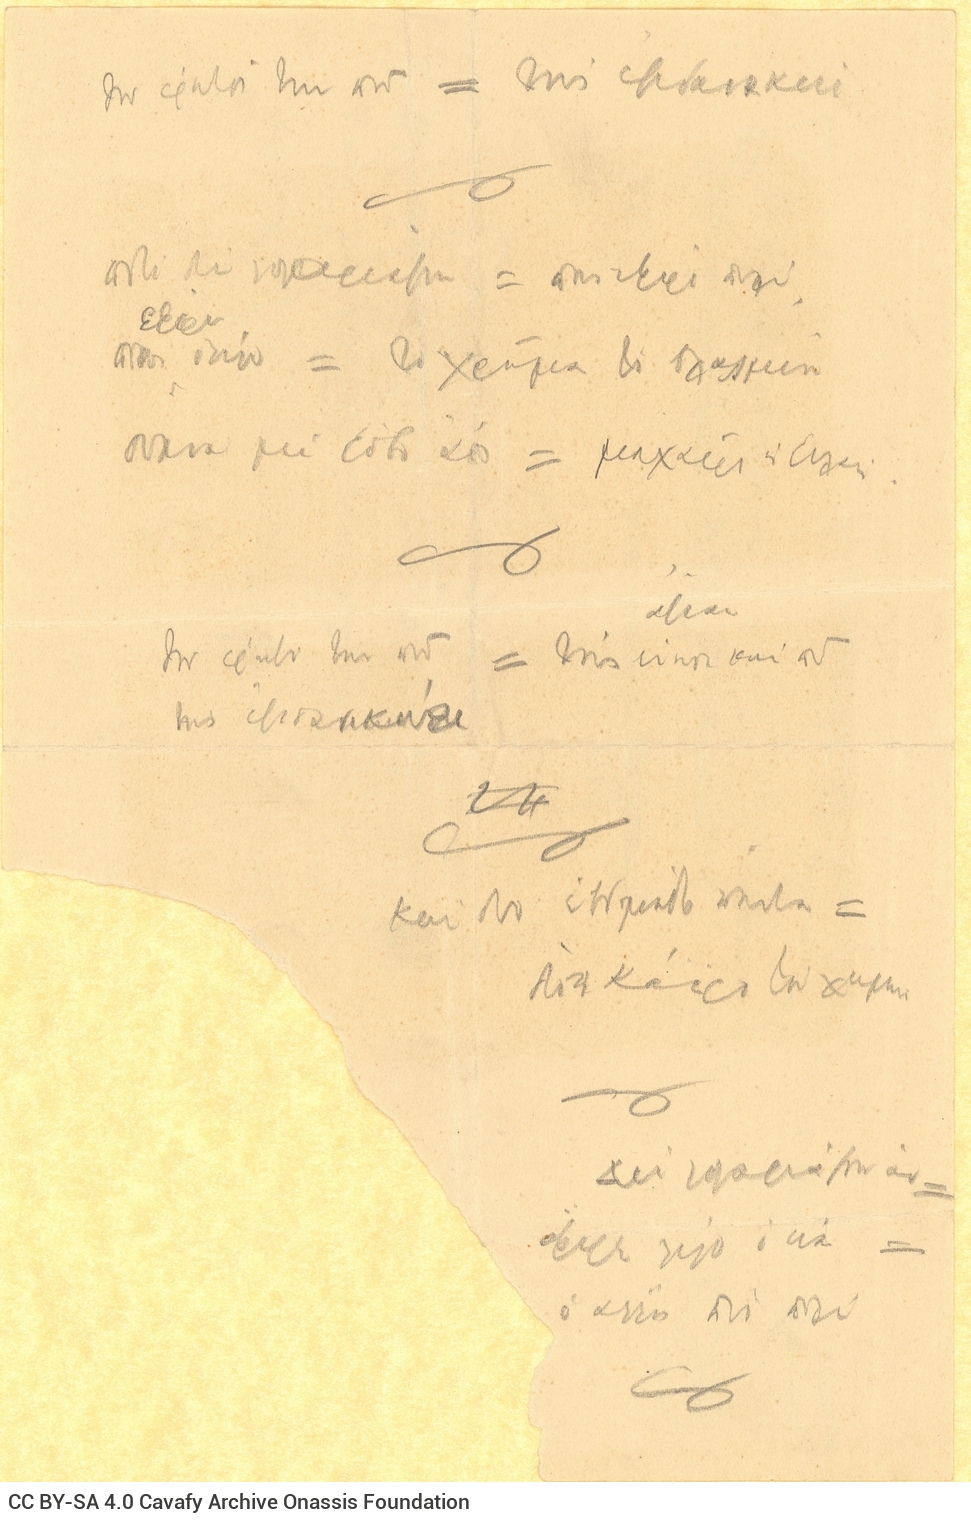 Handwritten drafts of the poem "Company of Four" on both sides of a sheet; on one side of a cut printed broadsheet with fr